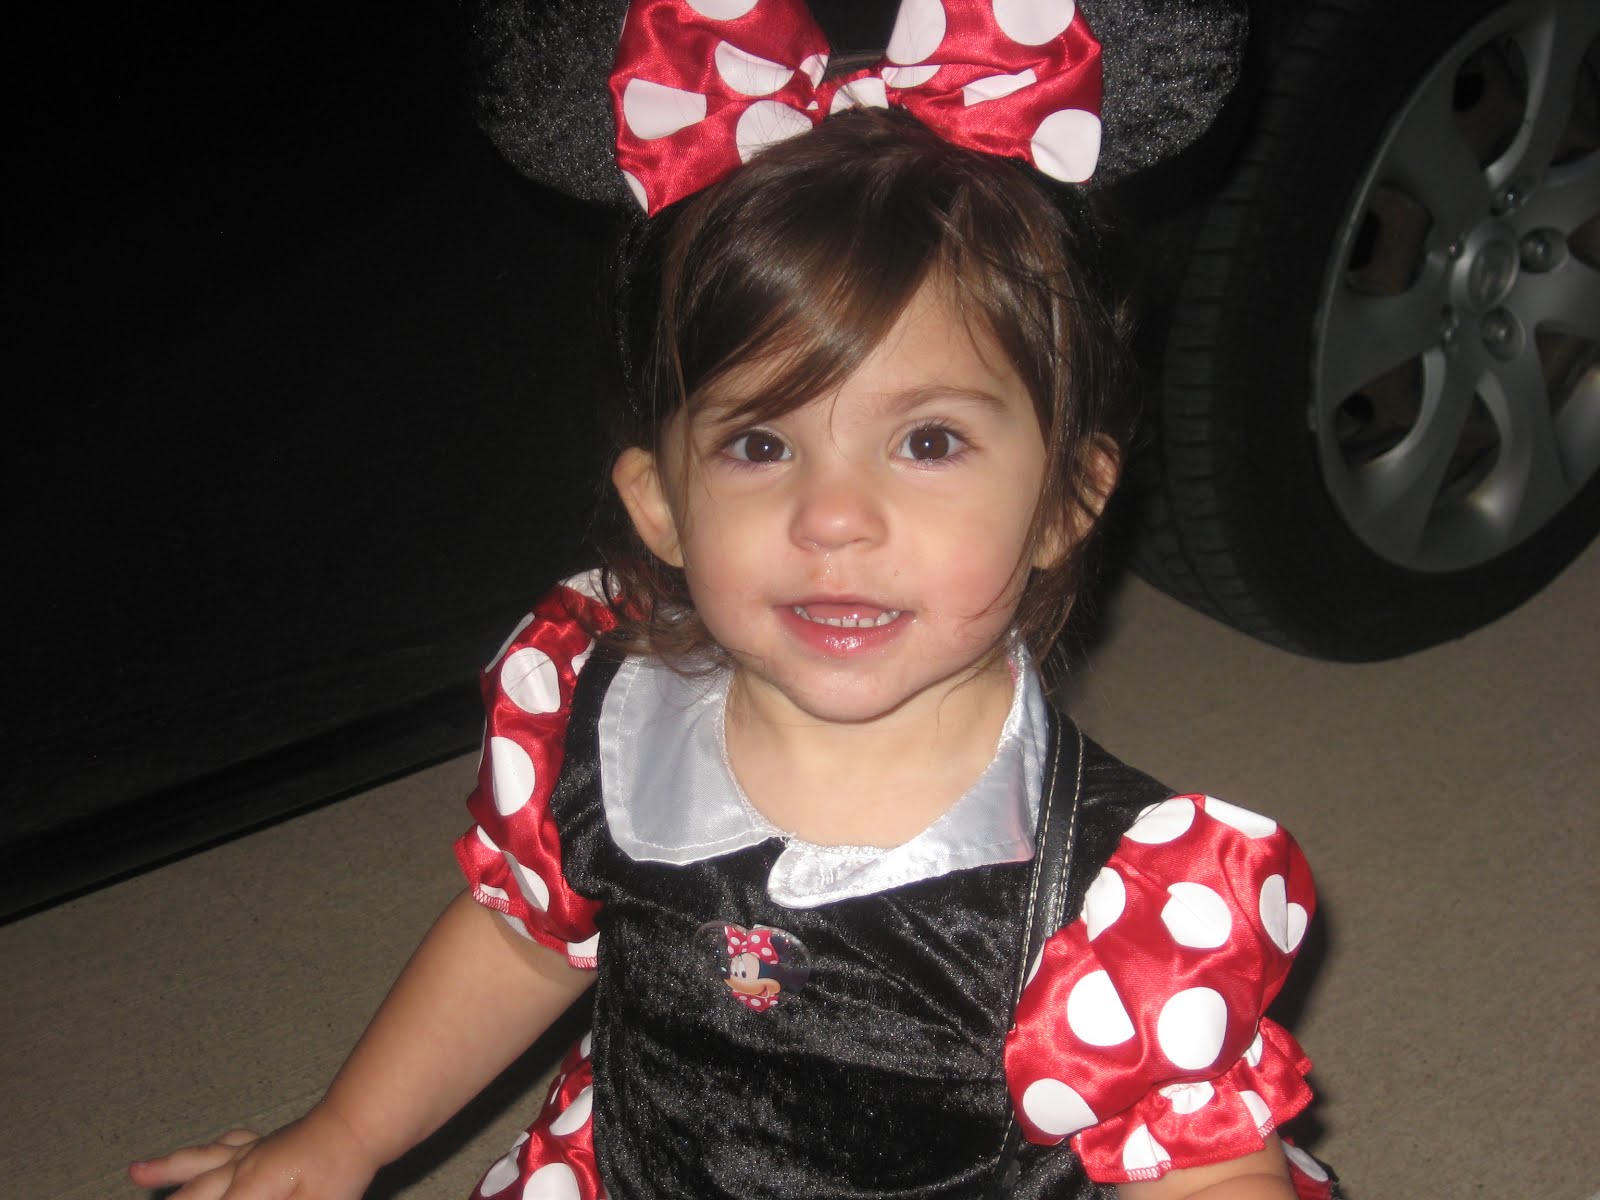 Riley as Minnie Mouse